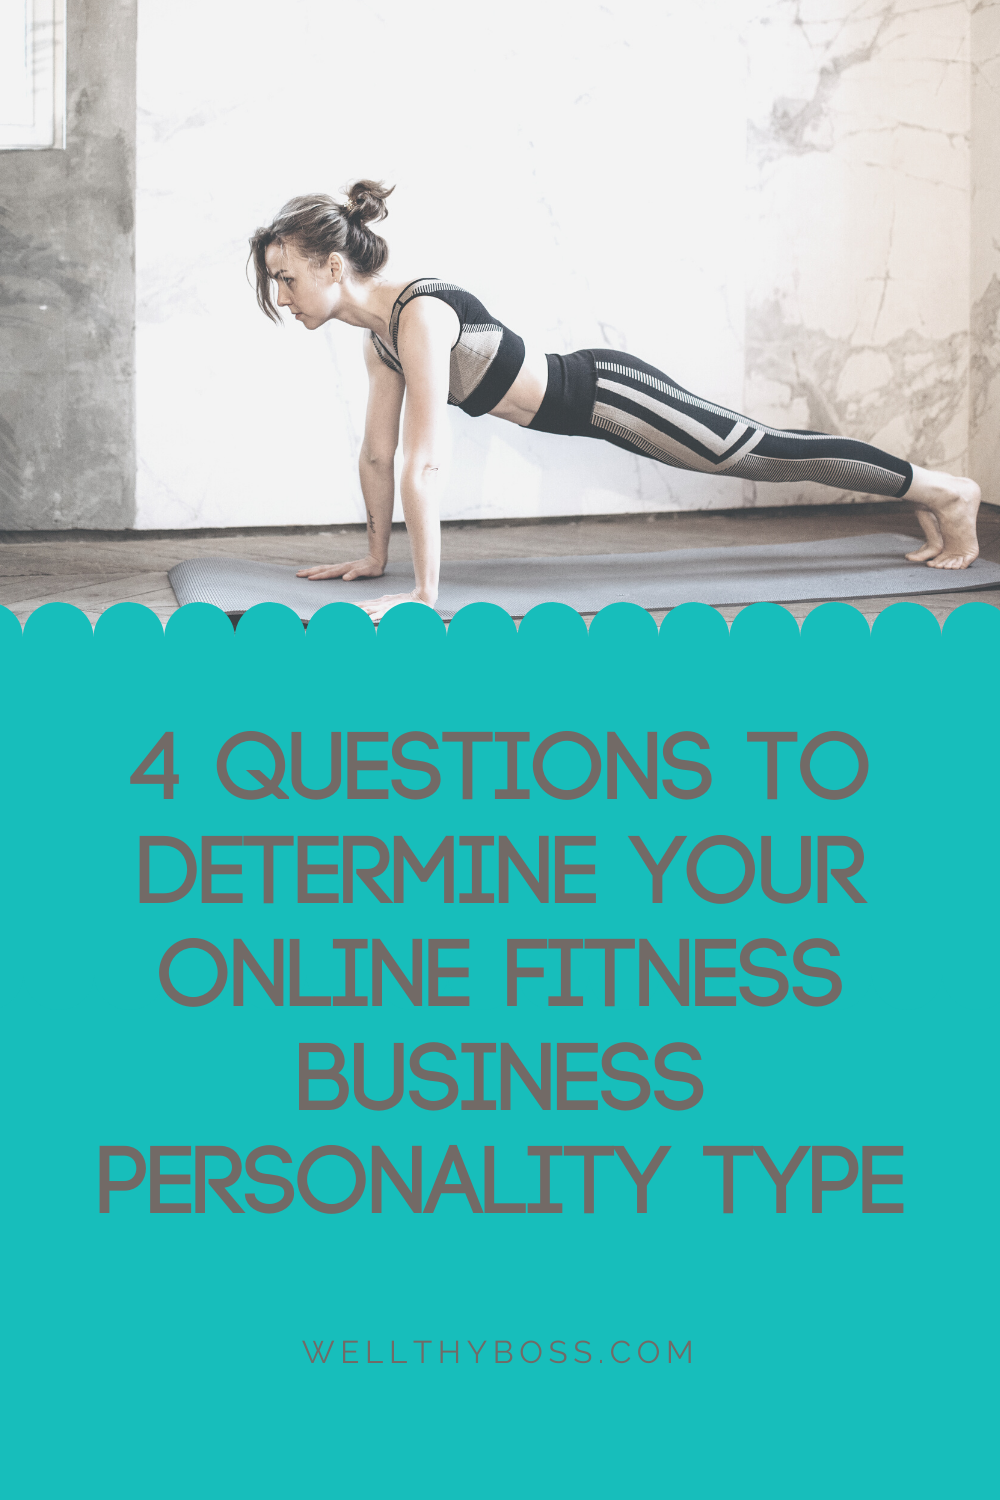 4 Questions to Determine Your Online Fitness Business Personality Type